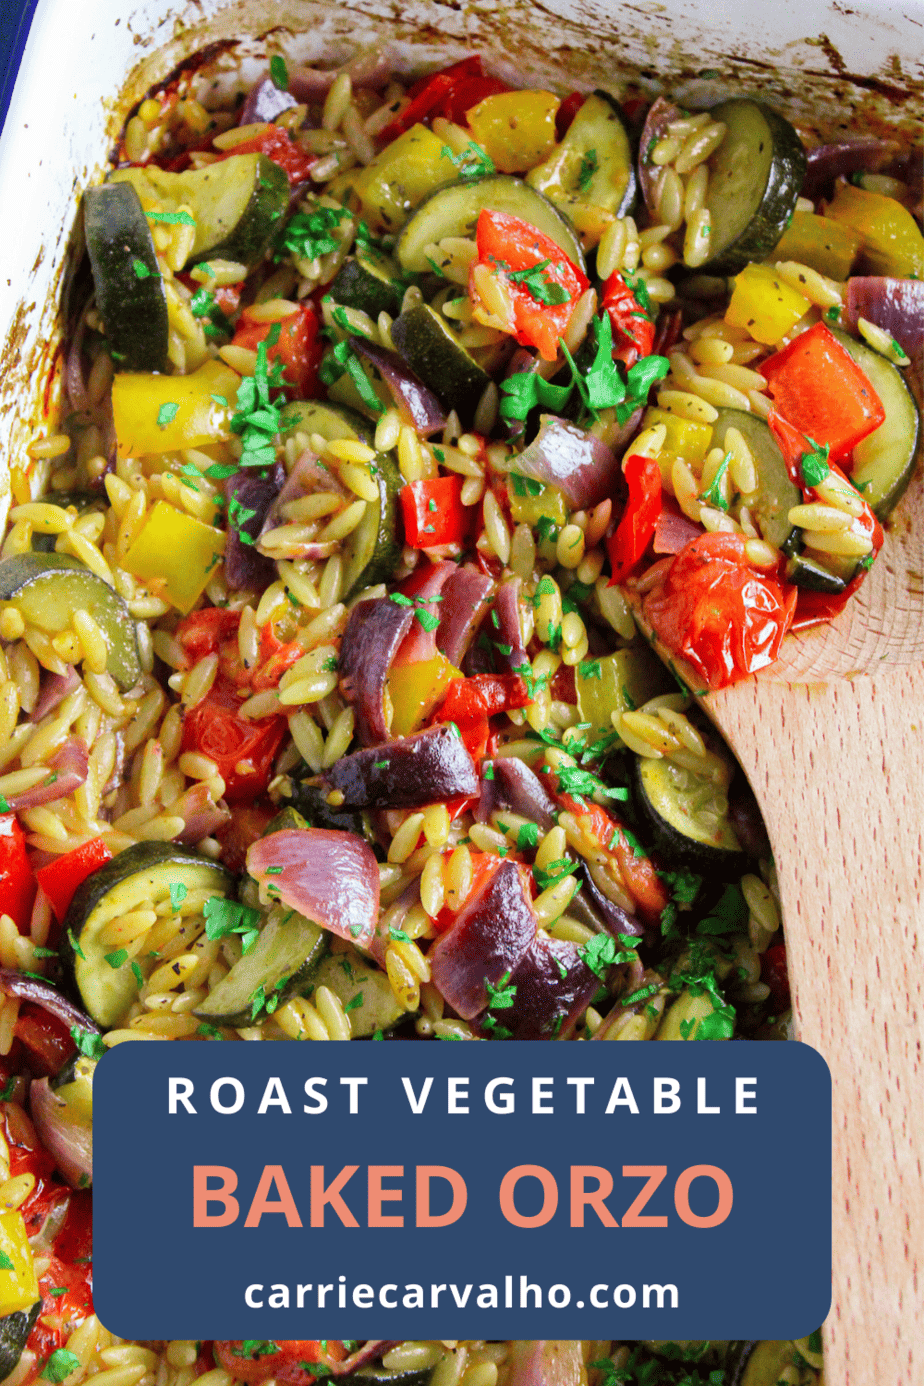 Baked Orzo with Roast Mediterranean Vegetables